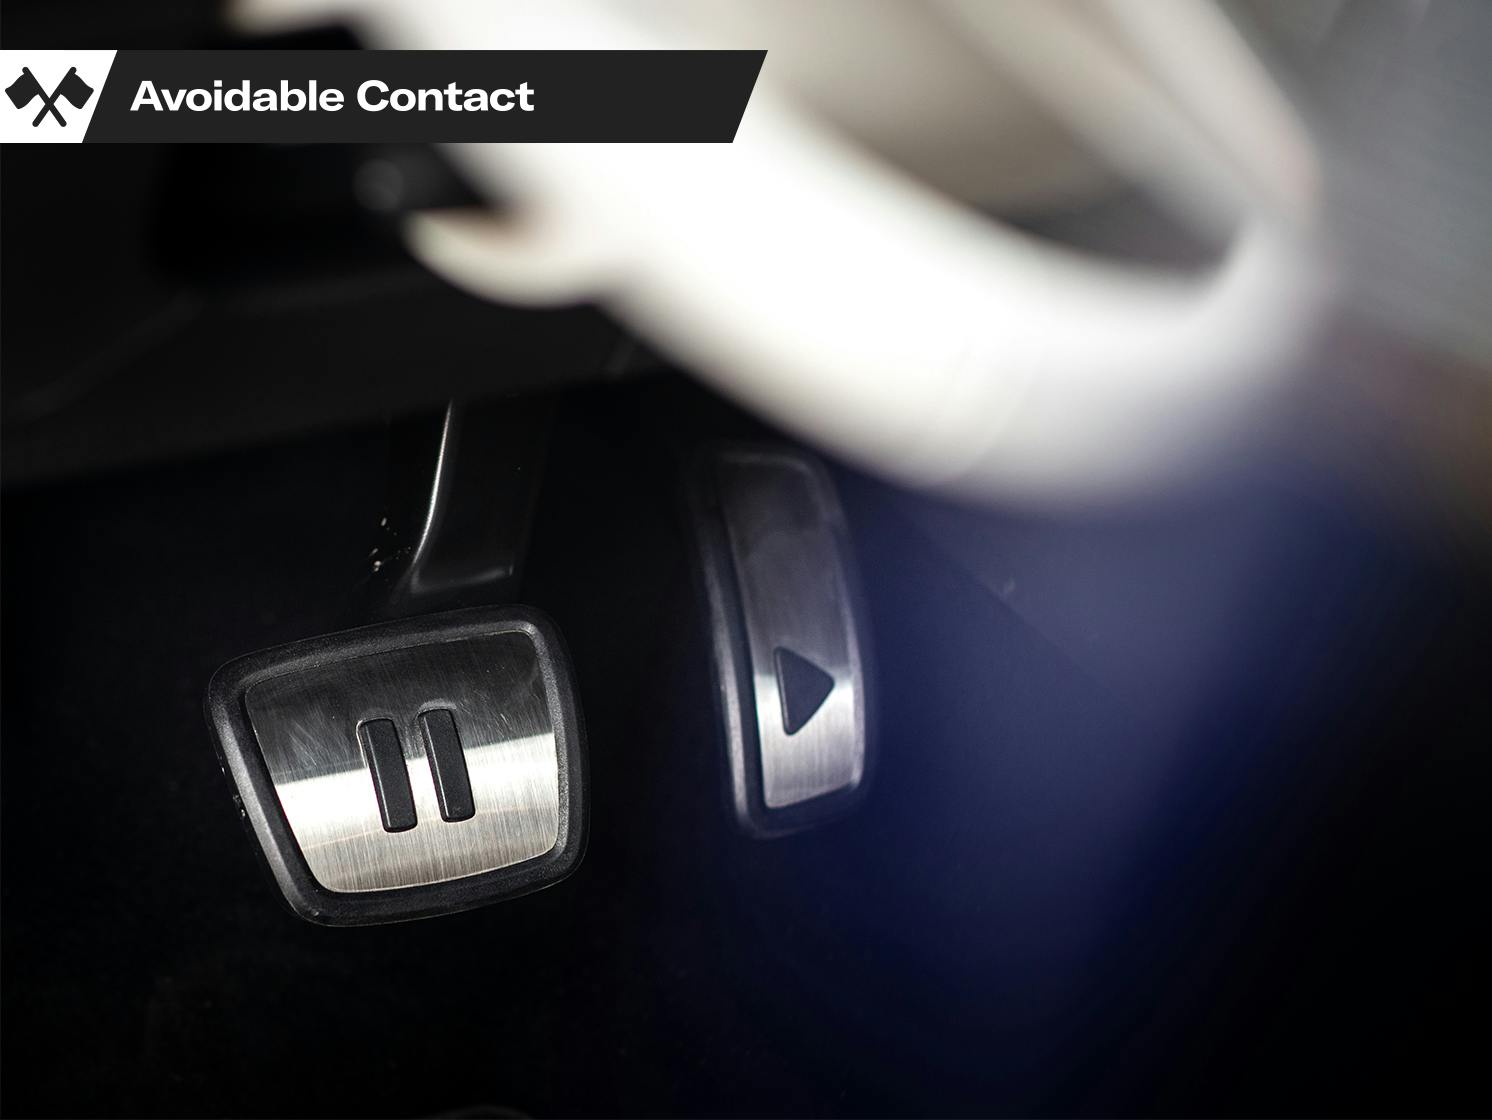 VW Volkswagen EV Play Pause Foot Pedals Avoidable Contact